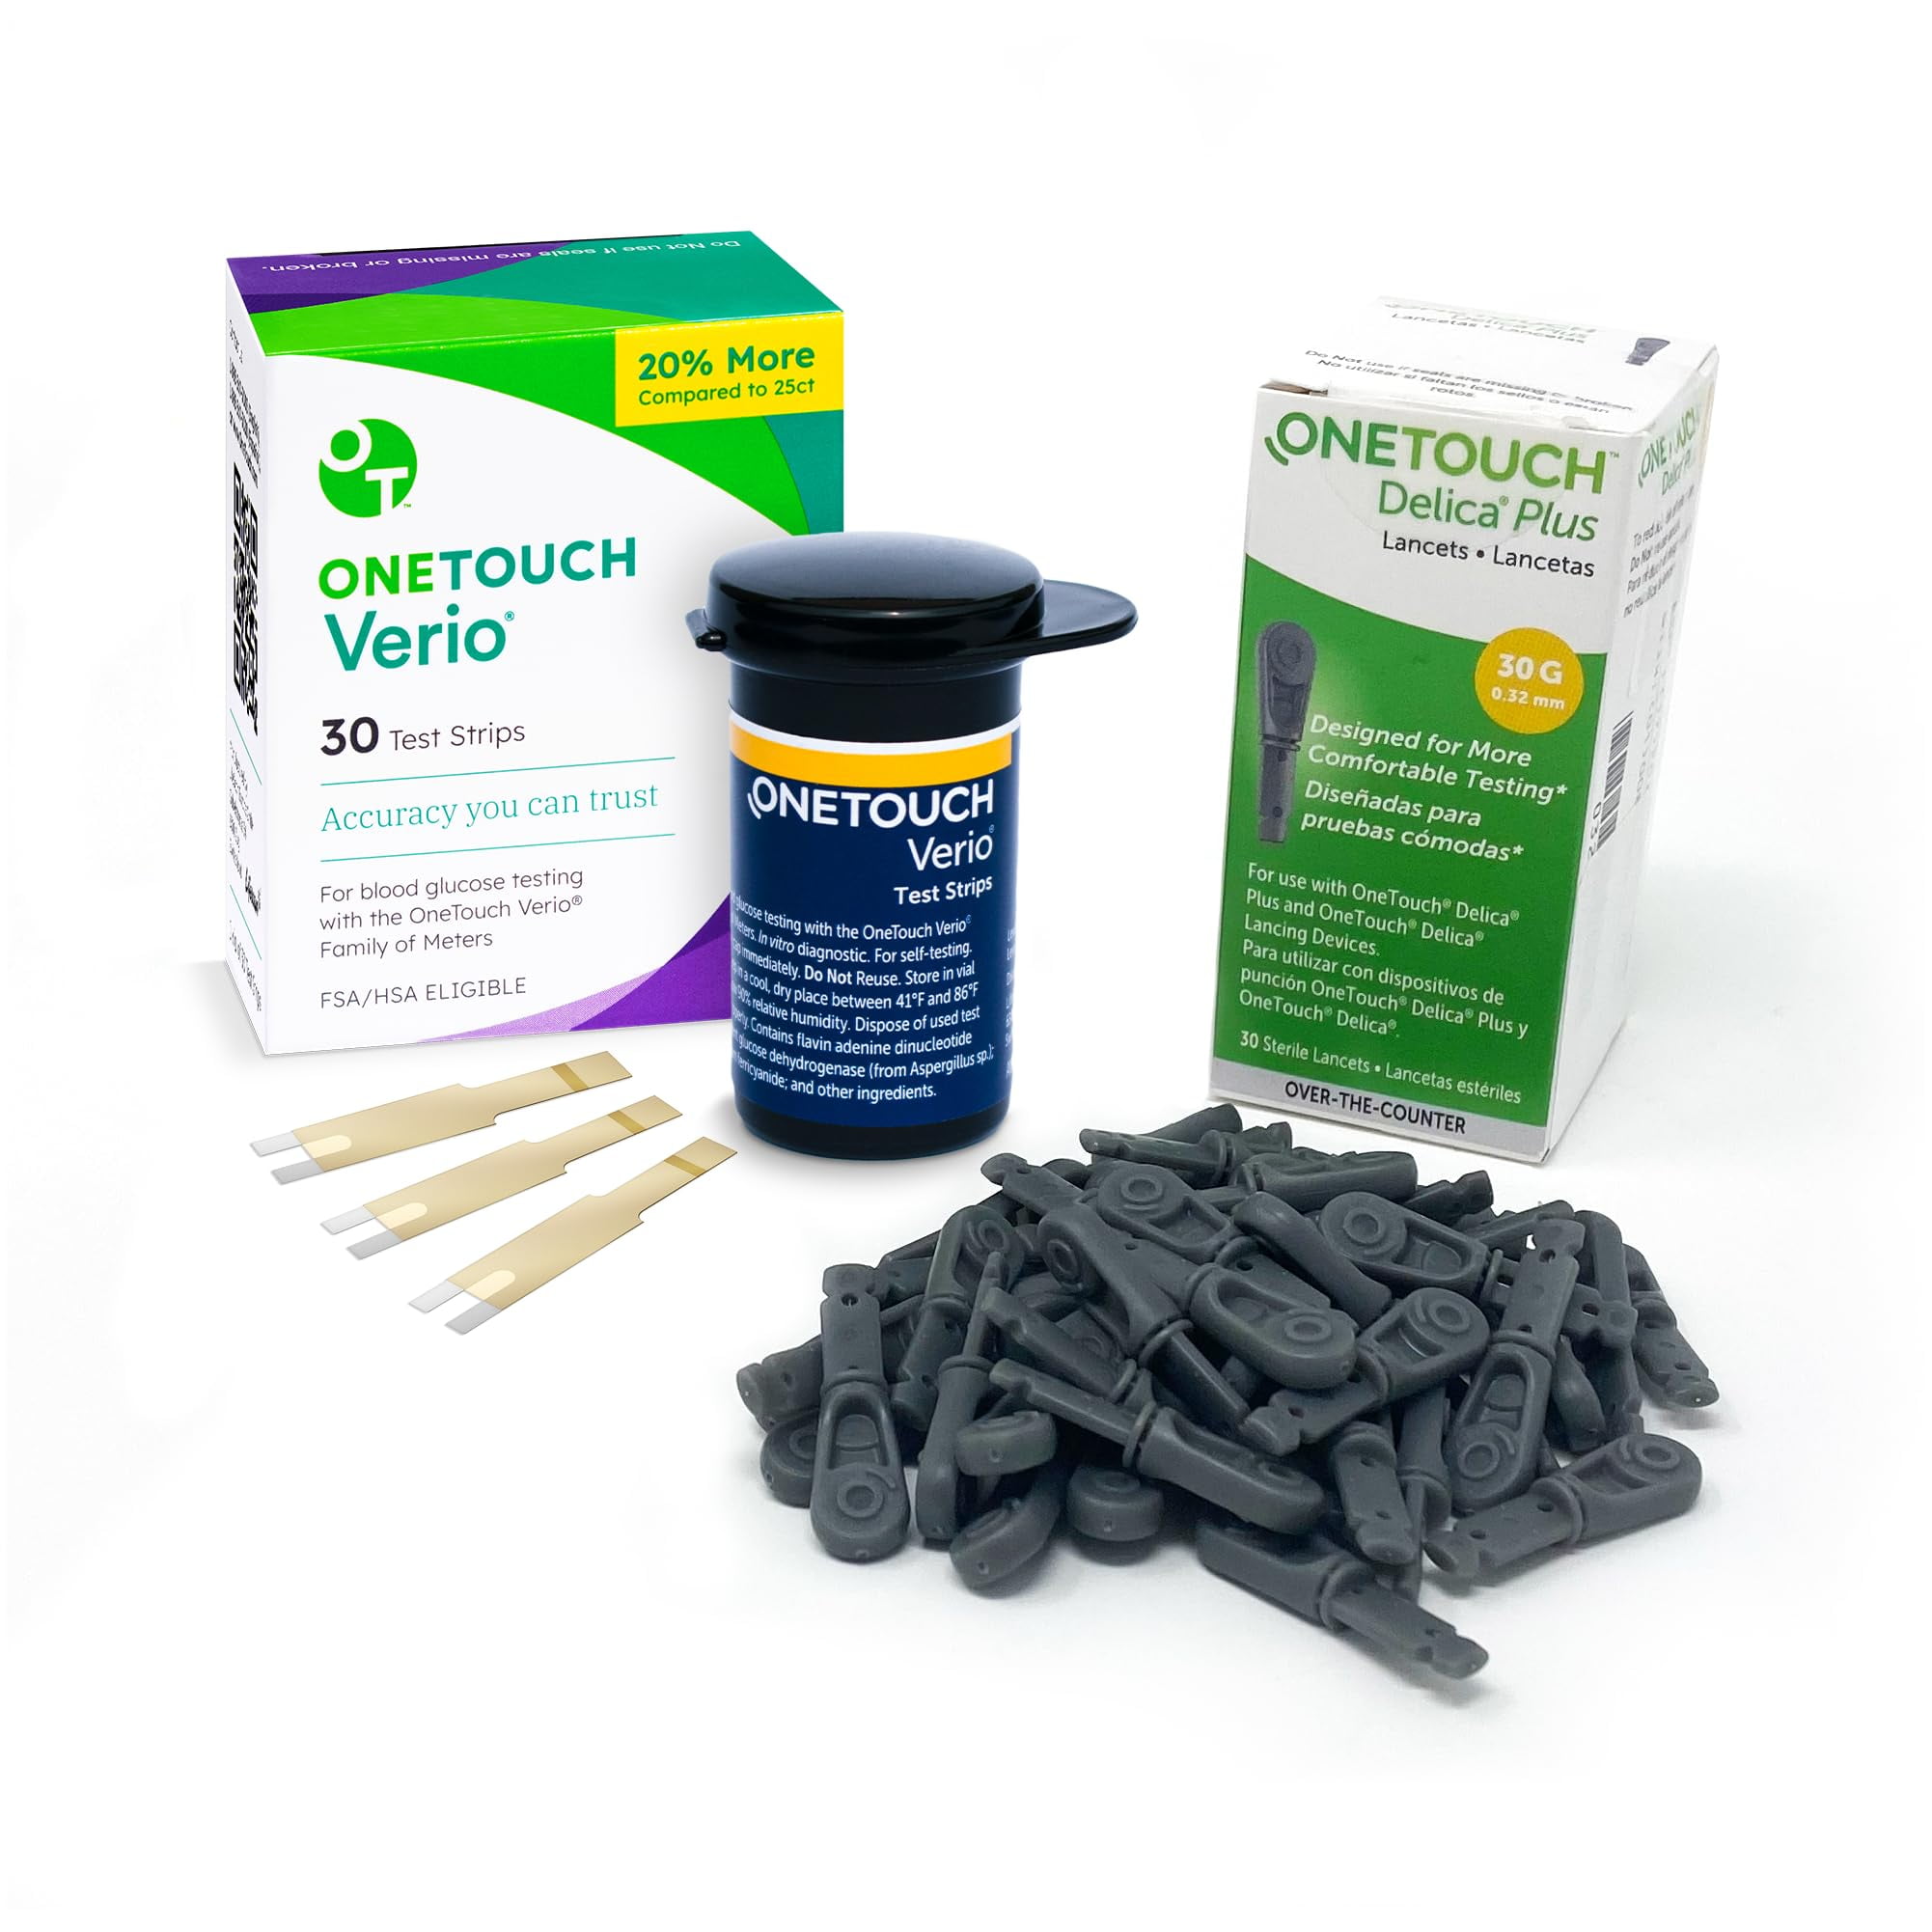 OneTouch Verio Reflect® Blood Glucose Monitoring System, 1 ct - Kroger